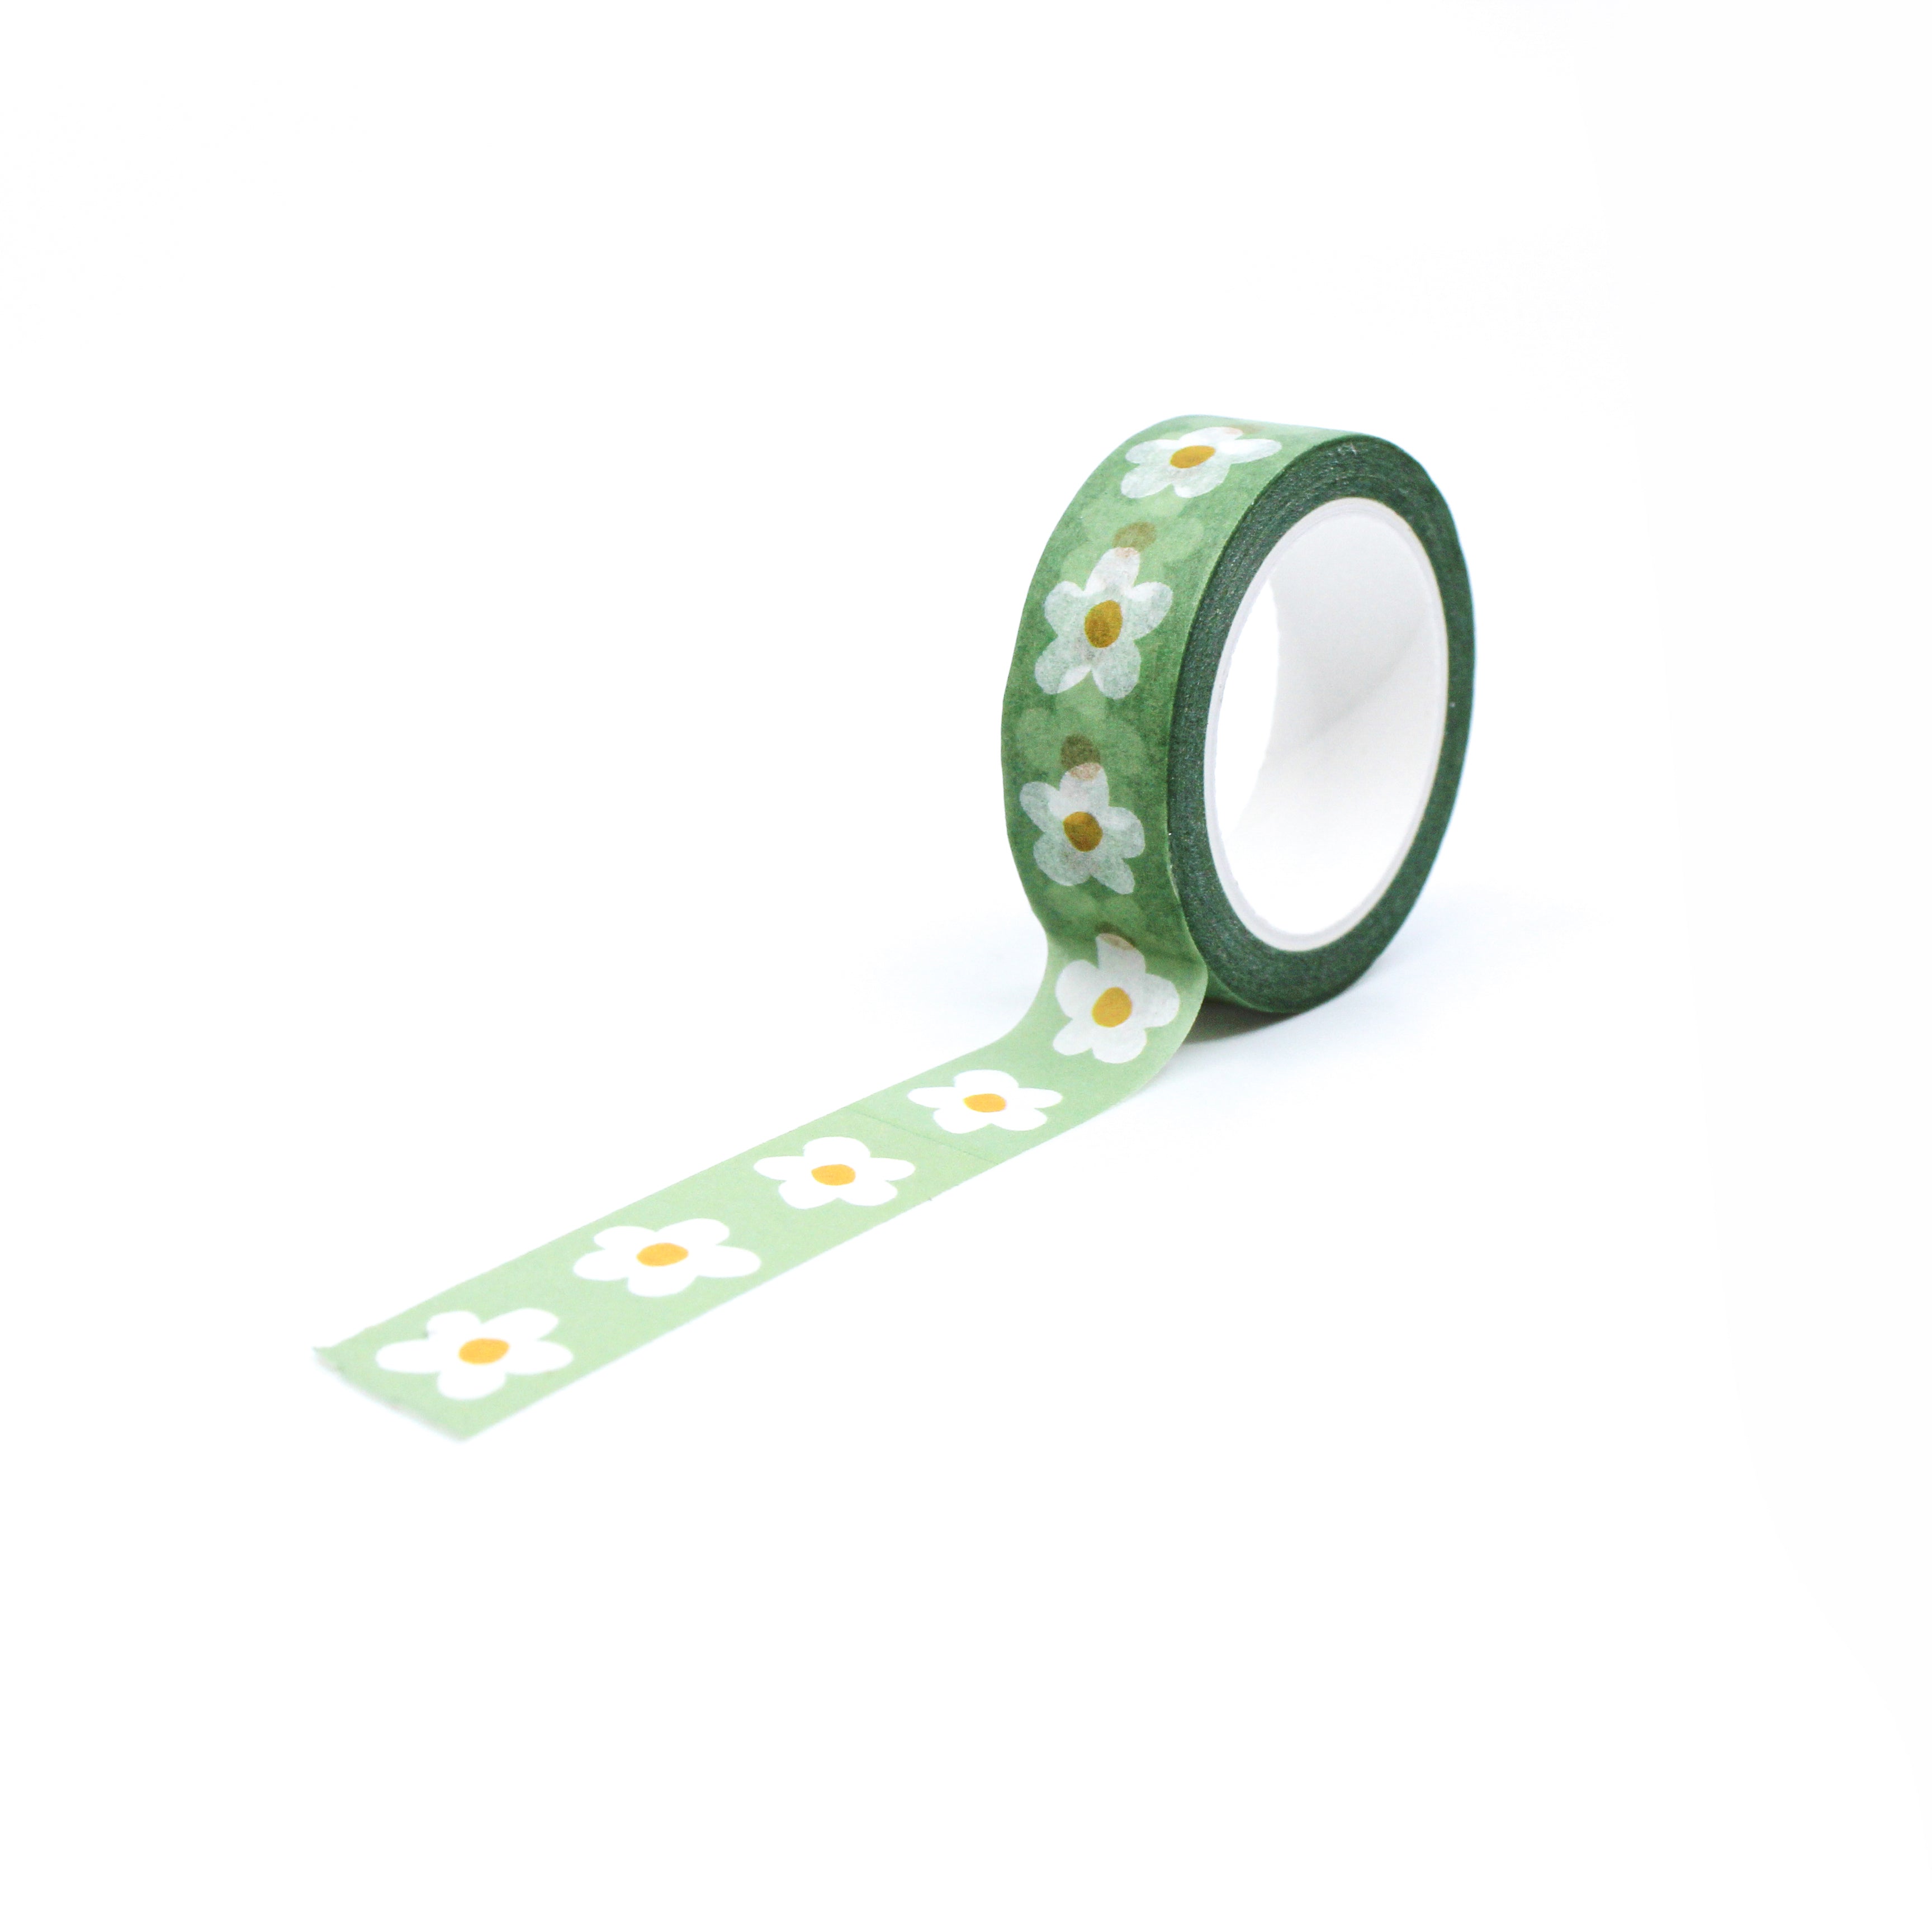 This is a full pattern repeat view of green daisy flower washi tape BBB Supplies Craft Shop